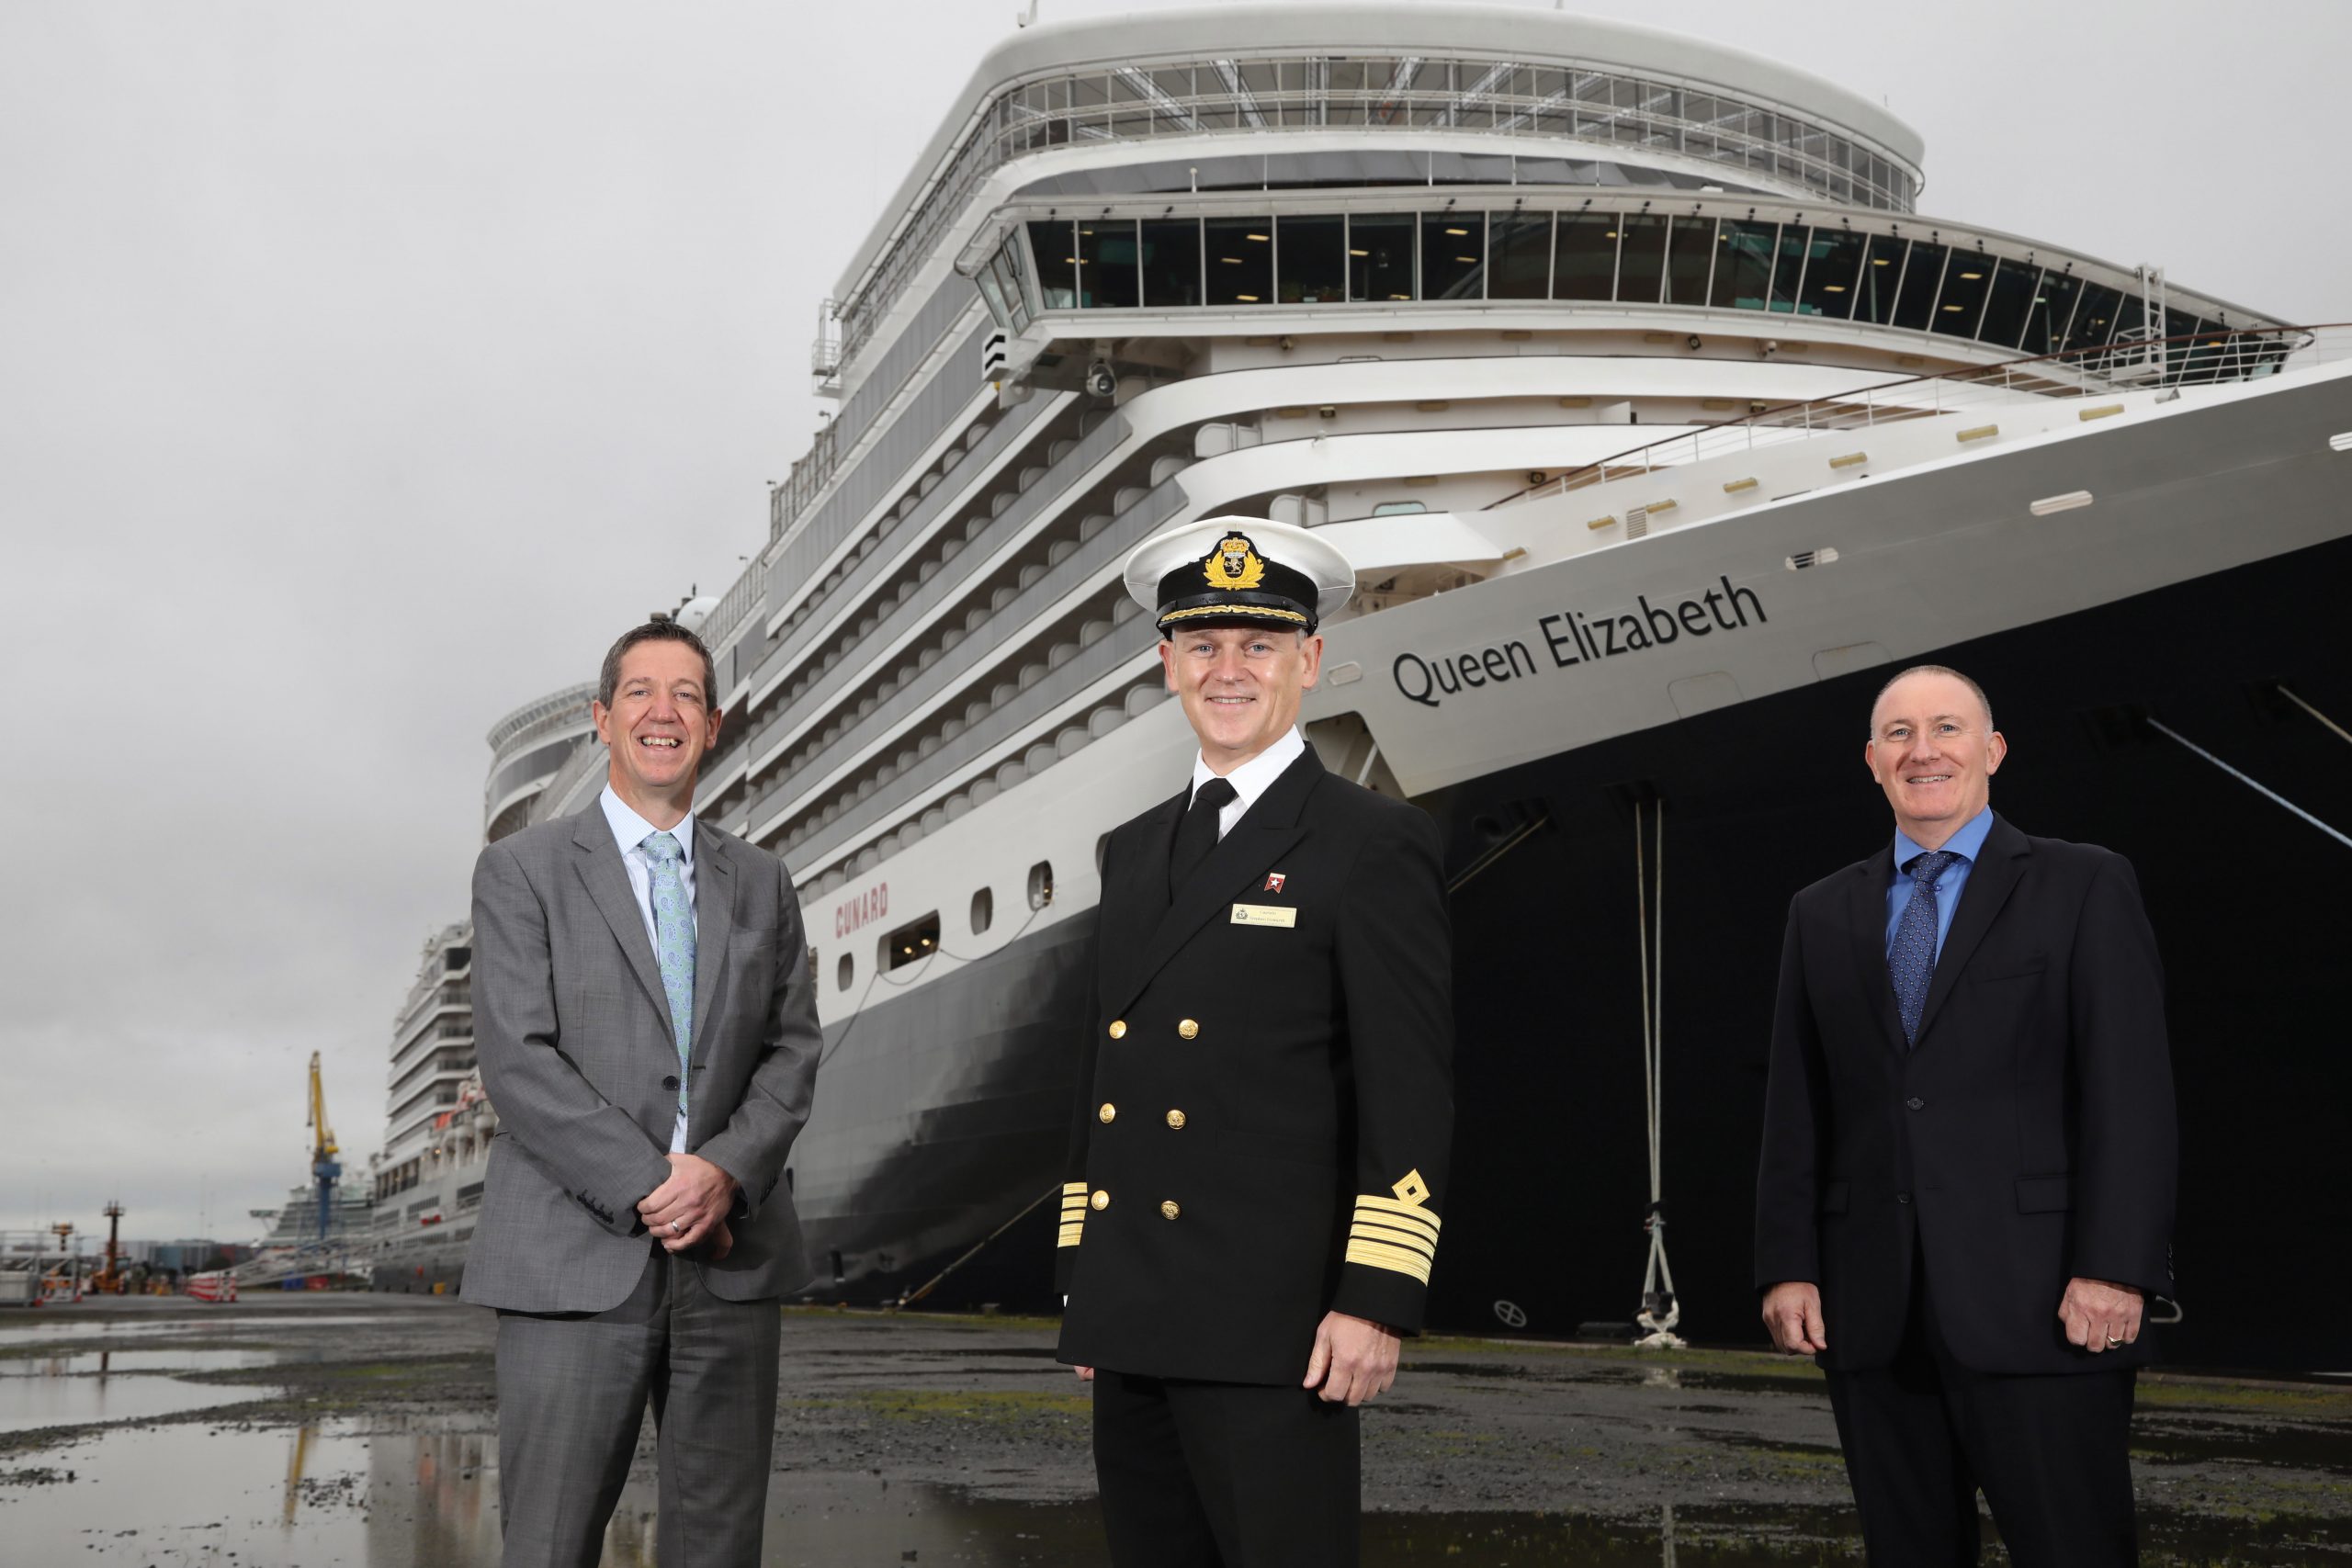 Belfast Welcomes 1000th Cruise Ship Call to the City